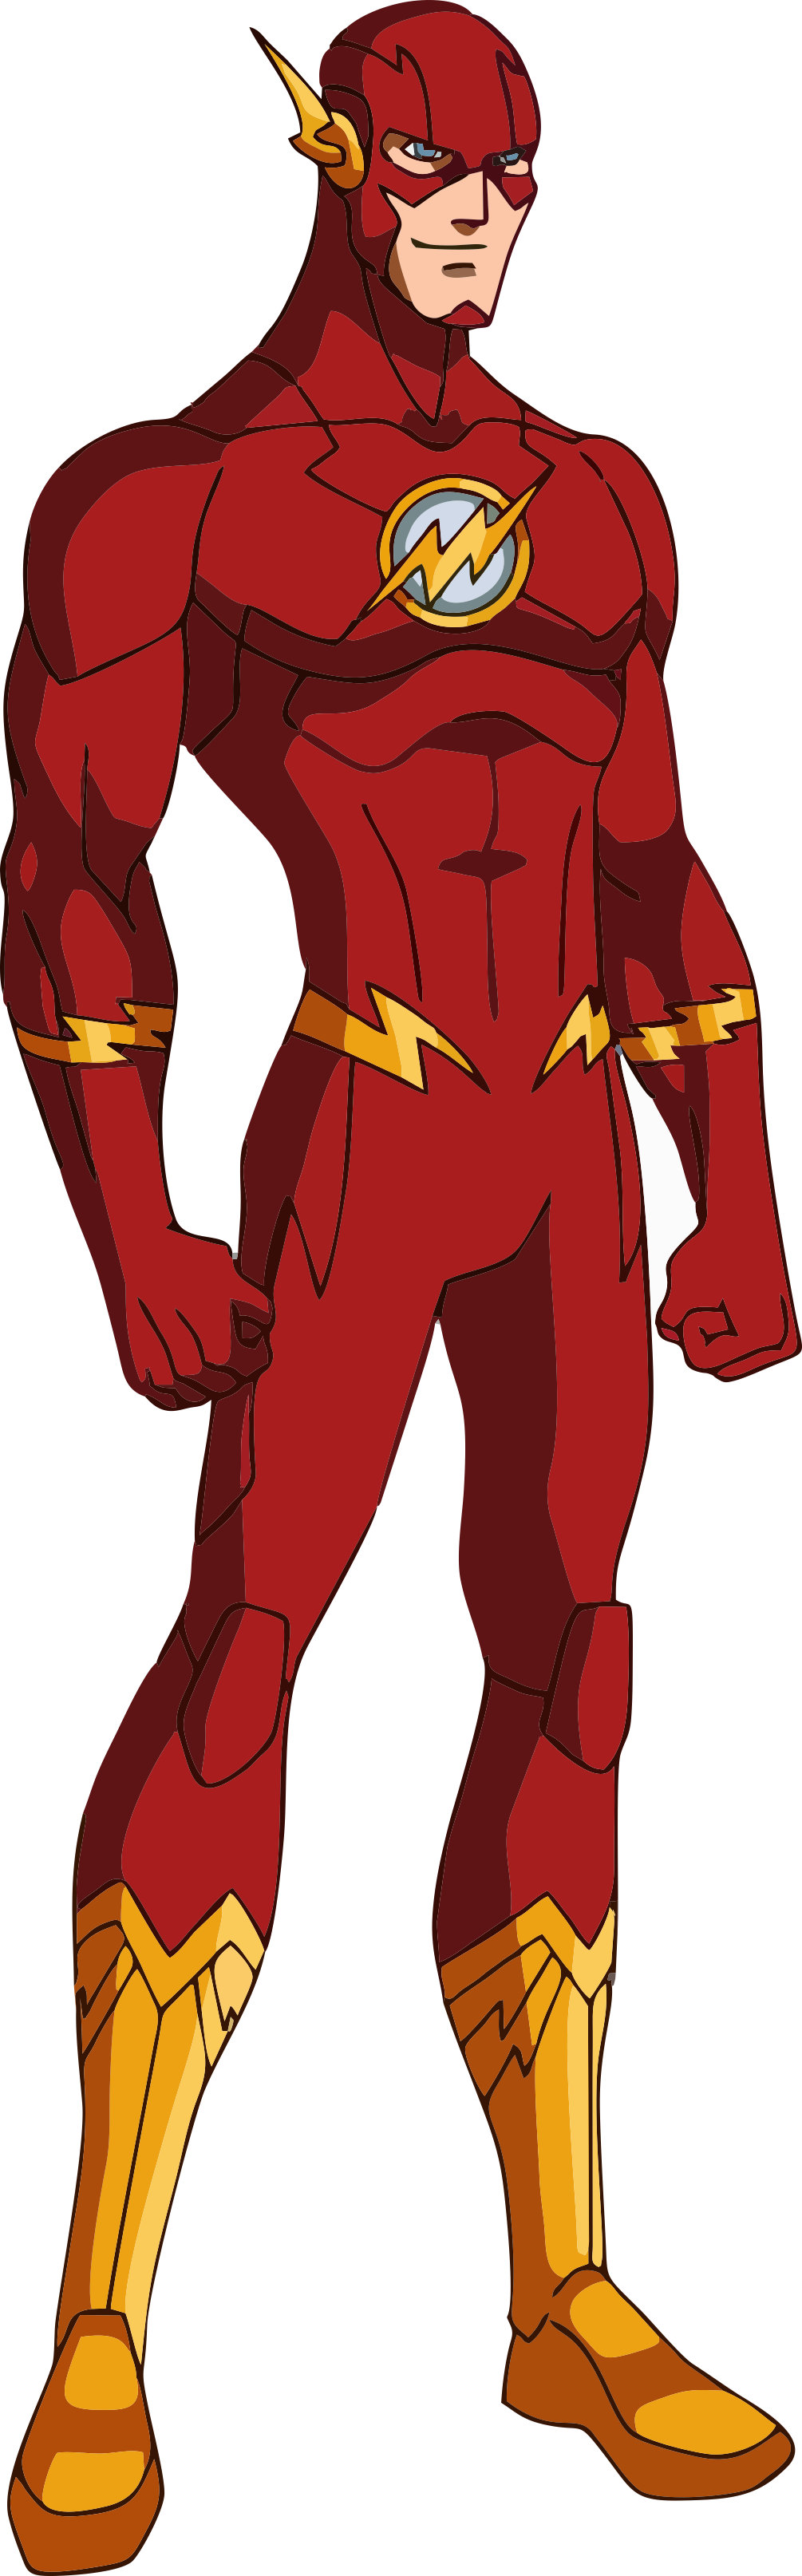 Free The Flash PNG Transparent Images, Download Free The Flash PNG